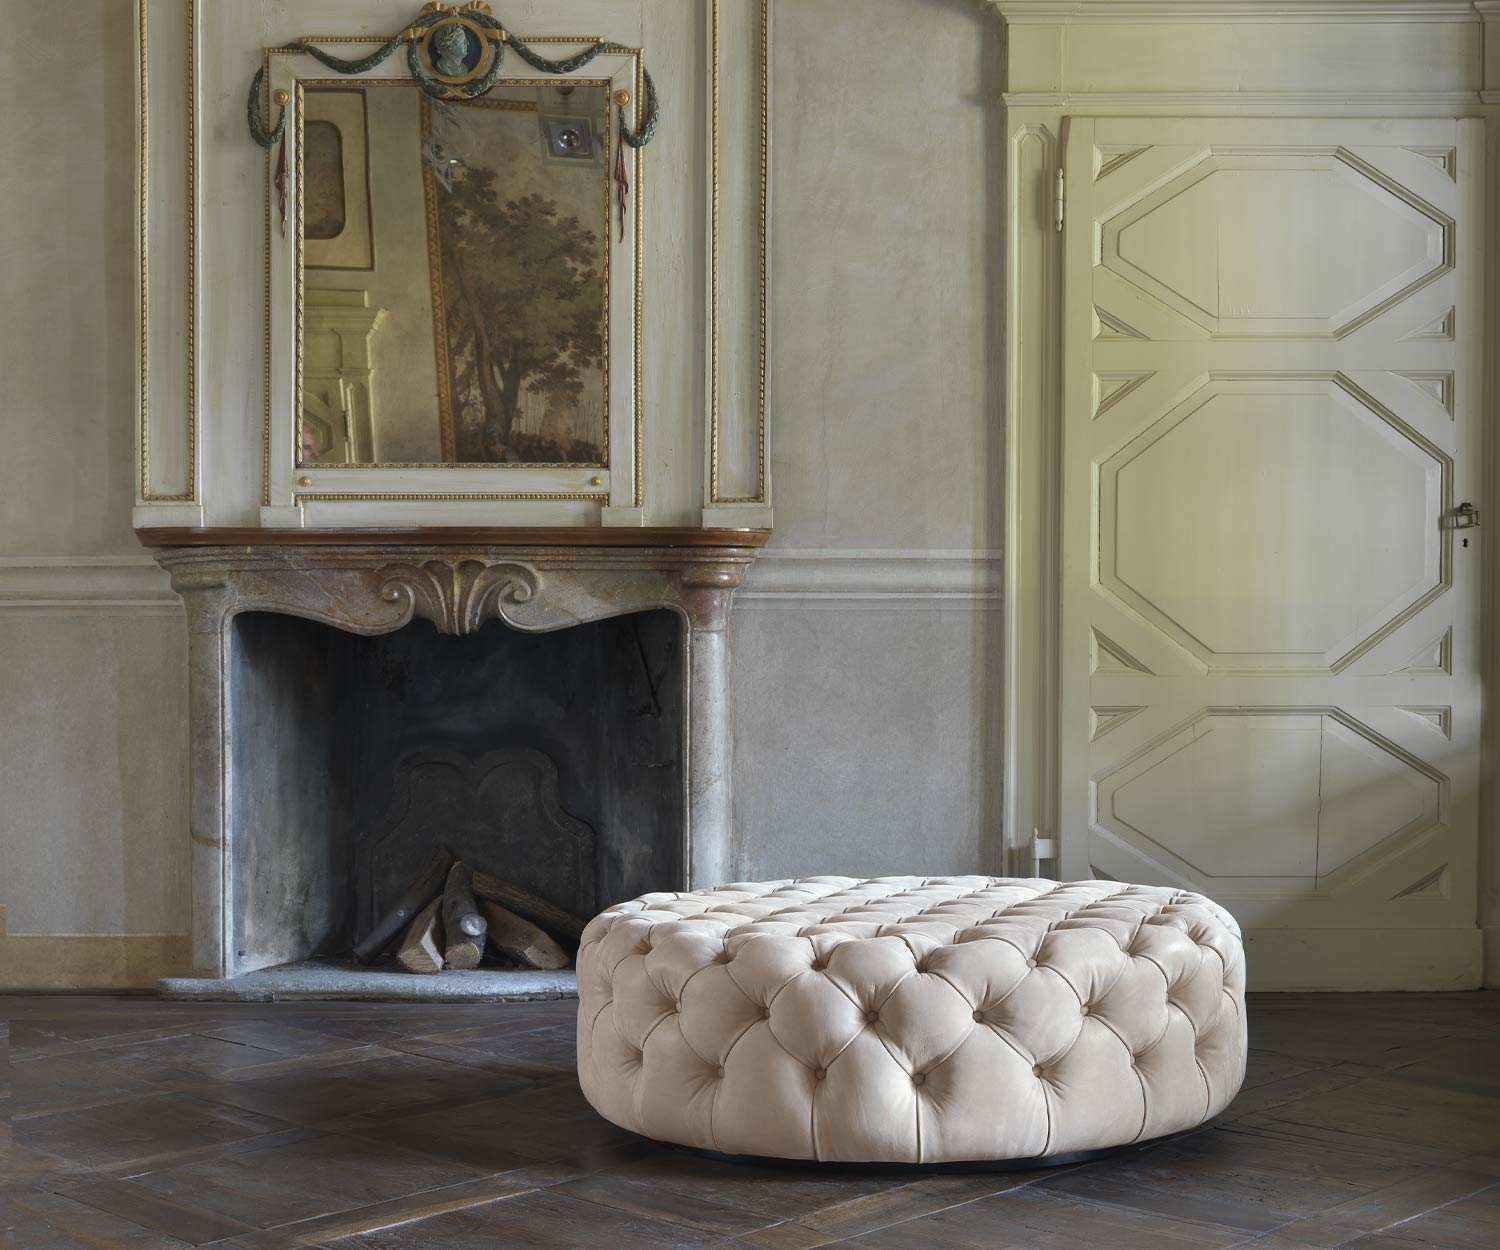 Round Marelli Matisse stool by the fireplace in white Capitonne finish